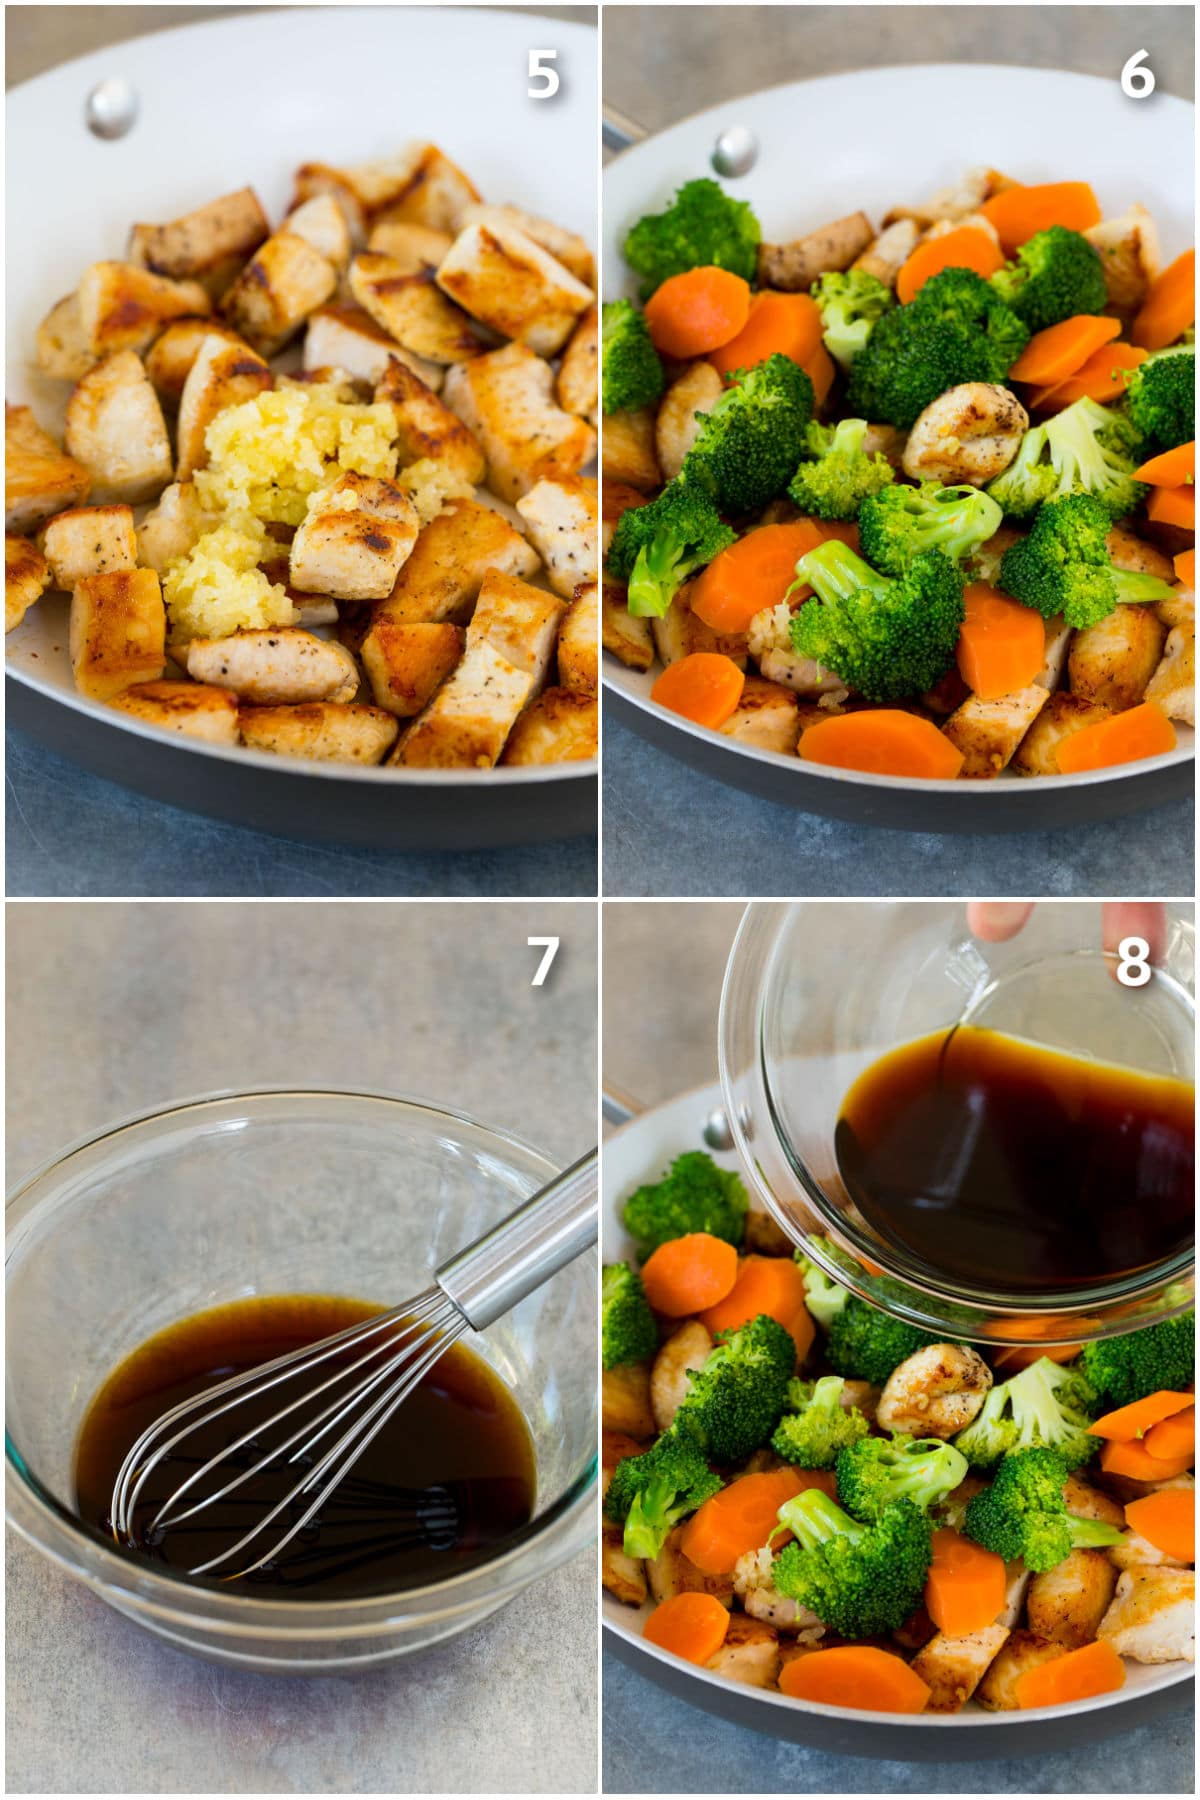 Step by step shots showing how to cook chicken and vegetables with stir fry sauce.